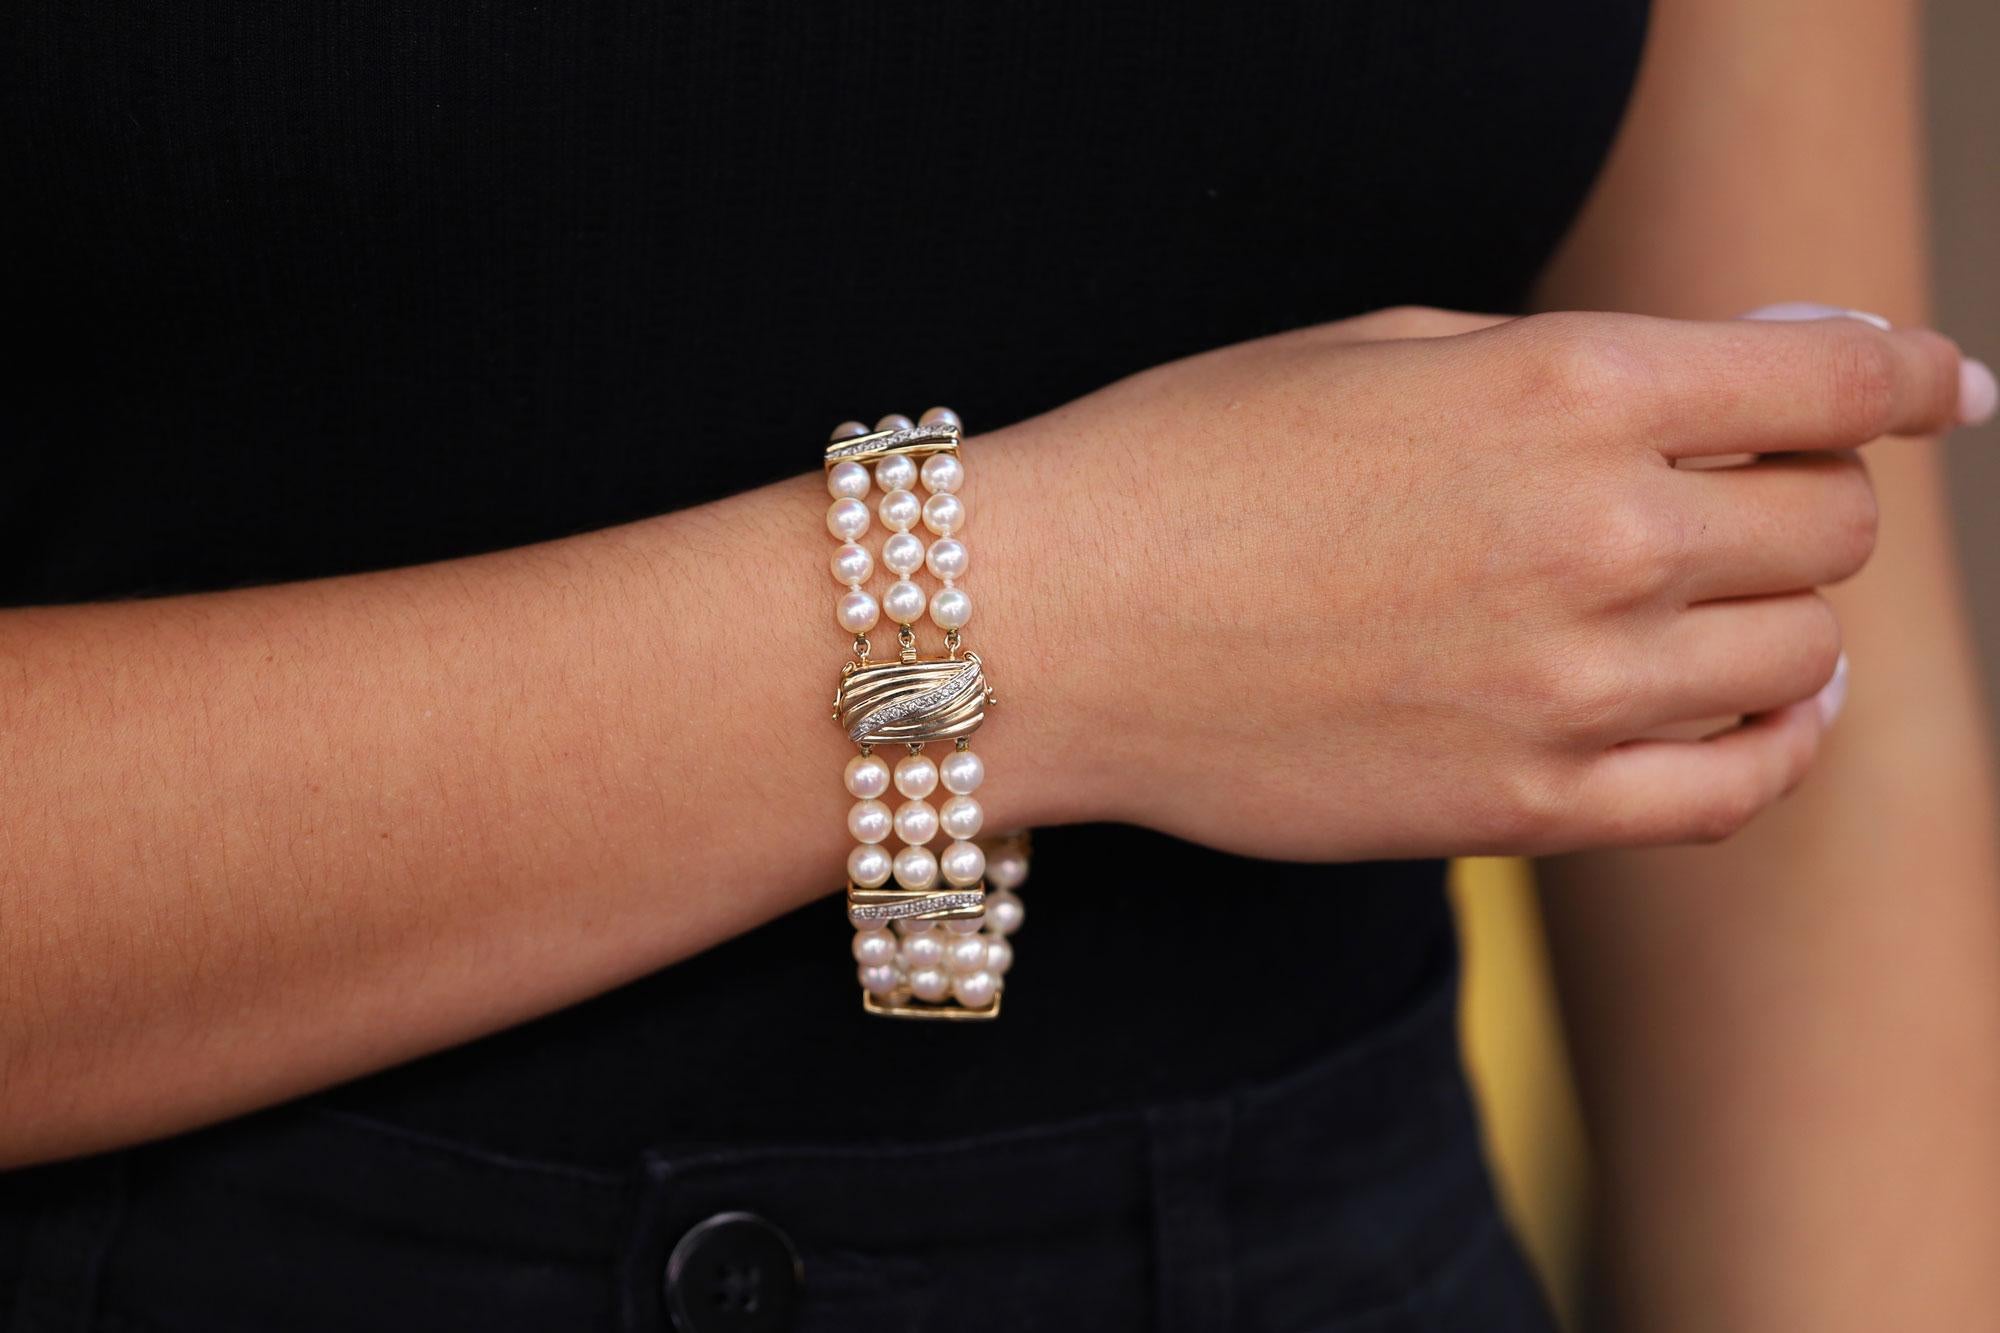 An essential wardrobe accessory and a wonderful gift for her, this vintage 3 row pearl bracelet is an enduring heirloom. The sculptural 14k yellow gold clasp and stations embellished with 73 sparkling diamonds lend a glimmer to the lustrous round